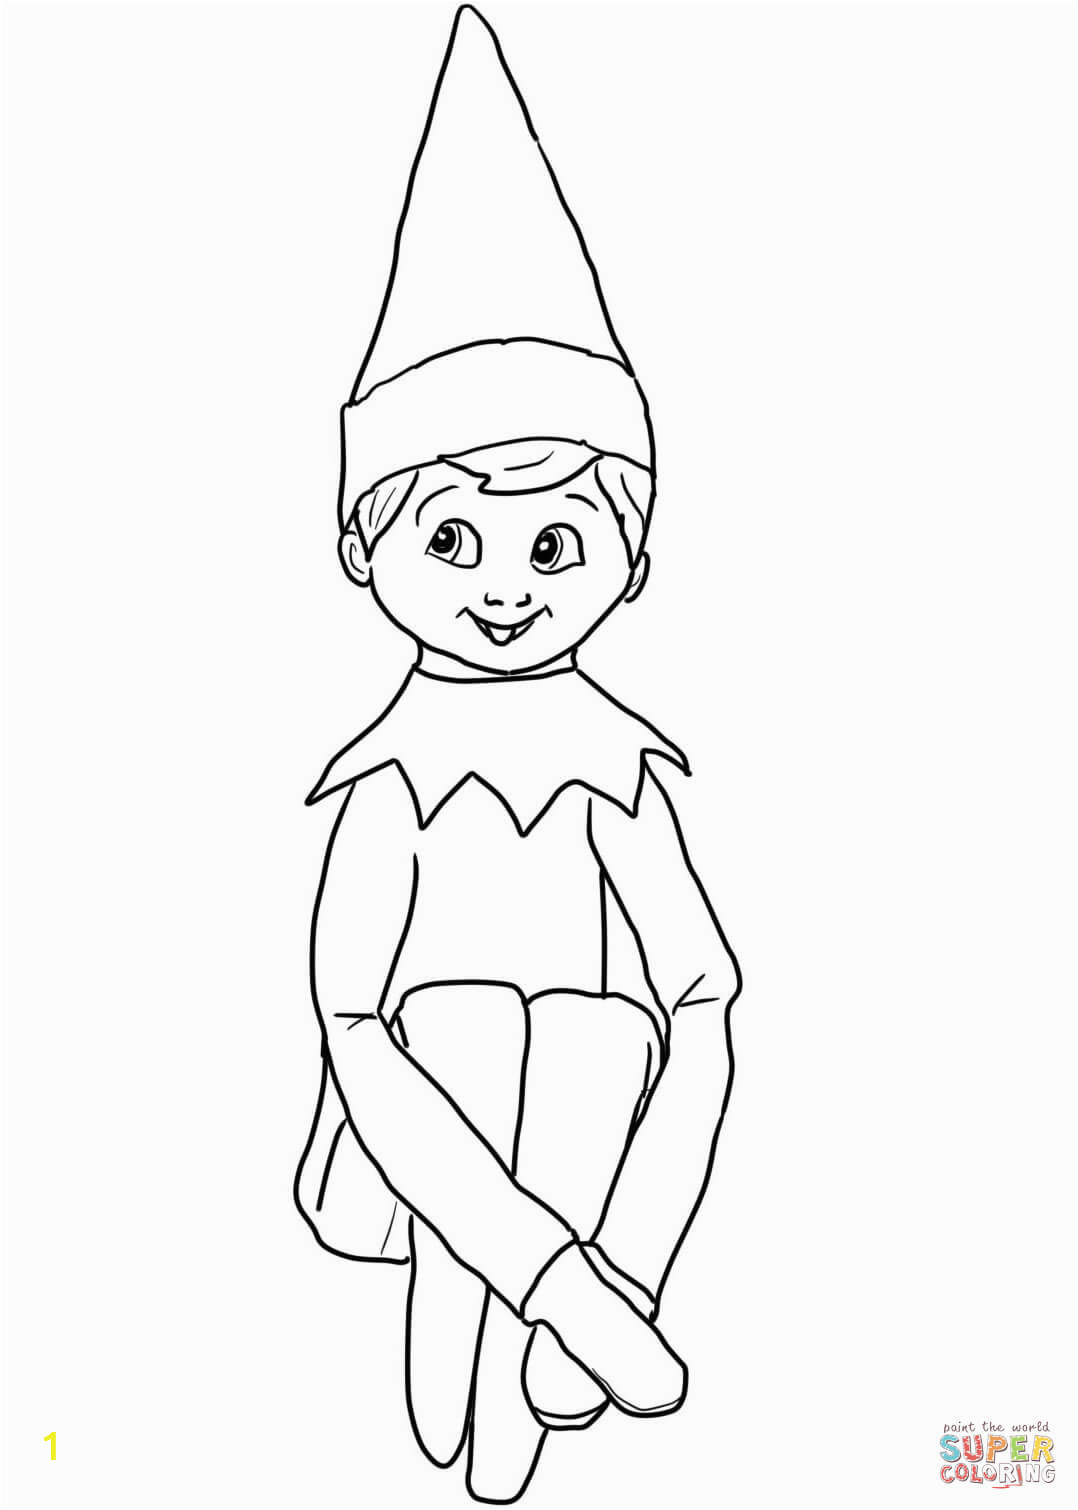 Elf On the Shelf Coloring Pages when Tara Met Blog Easy Elf On the Shelf Ideas for Real Moms